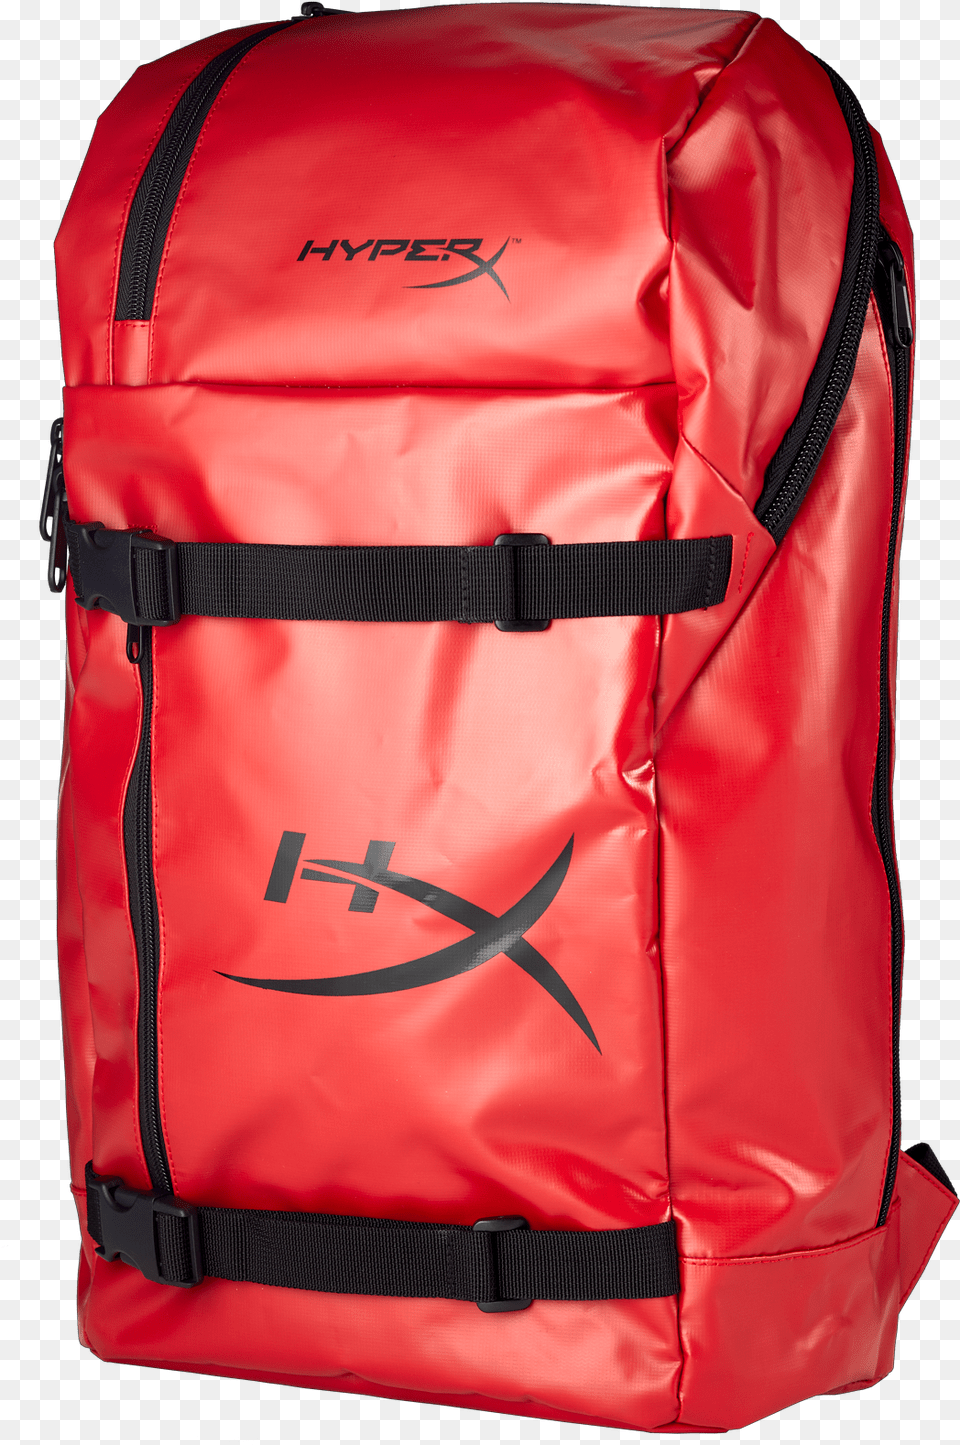 Hyperx Scout Red, Bag, Backpack Png